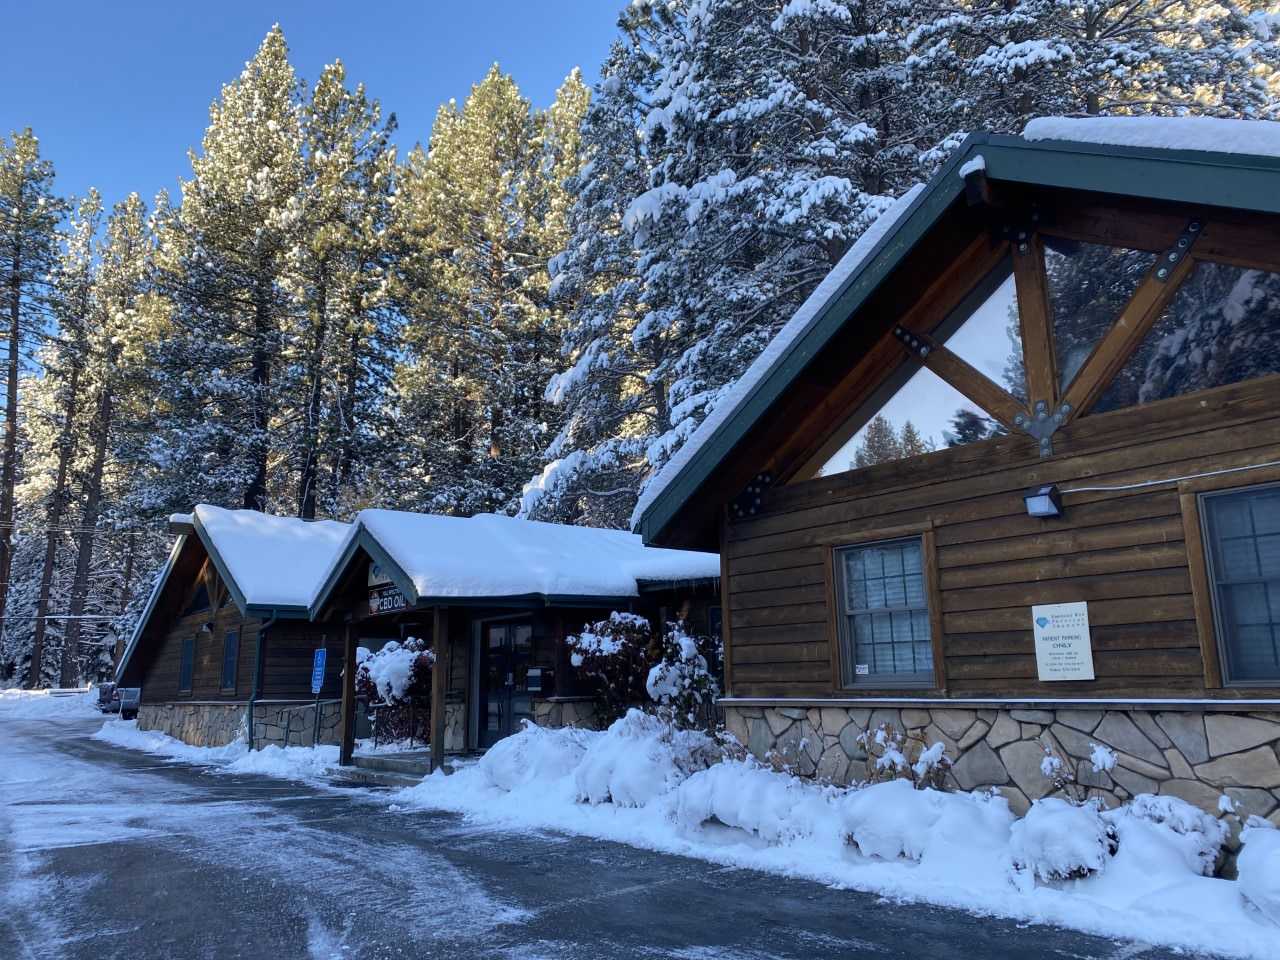 Winter at the Emerald Bay Physical Therapy Offices in South Lake Tahoe, California